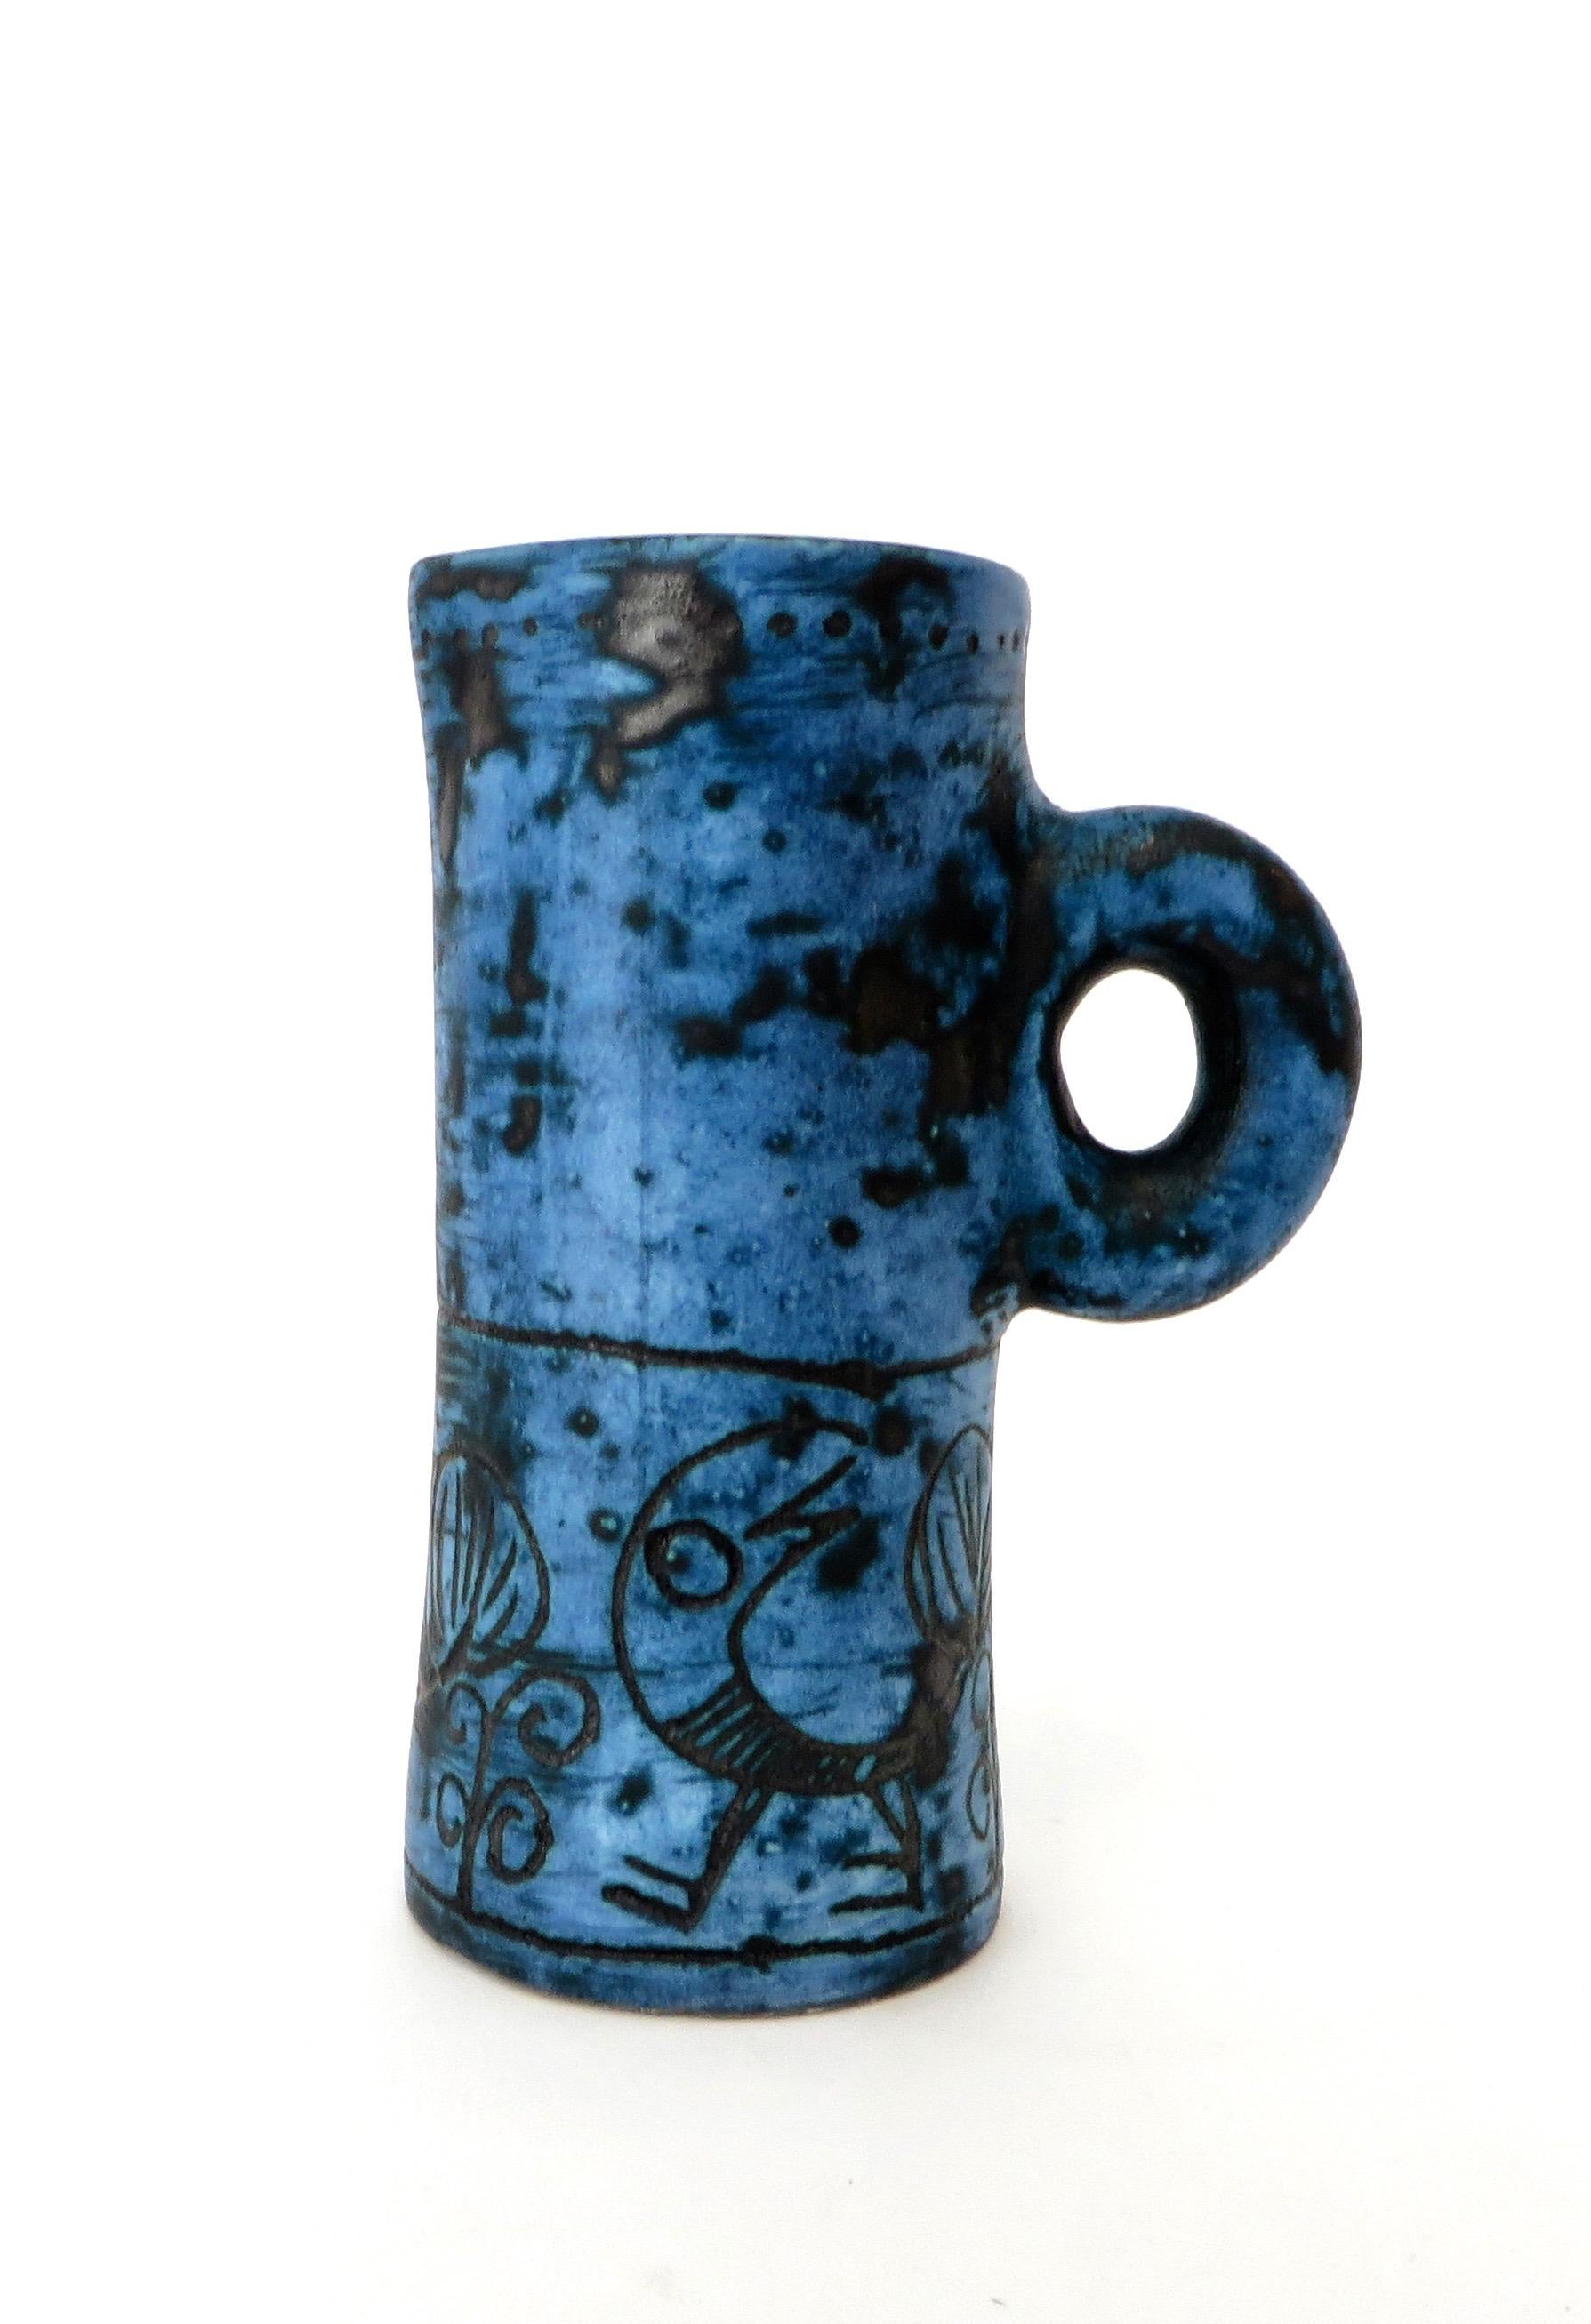 A French ceramic pitcher by noted artist Jacques Blin with wonderful image of a bird in his iconic dark blue glaze and sgraffito decoration. No chips or restorations. Signed. 
La Céramique Francaise des Années 50. Pierre Staudenmeyer, pp